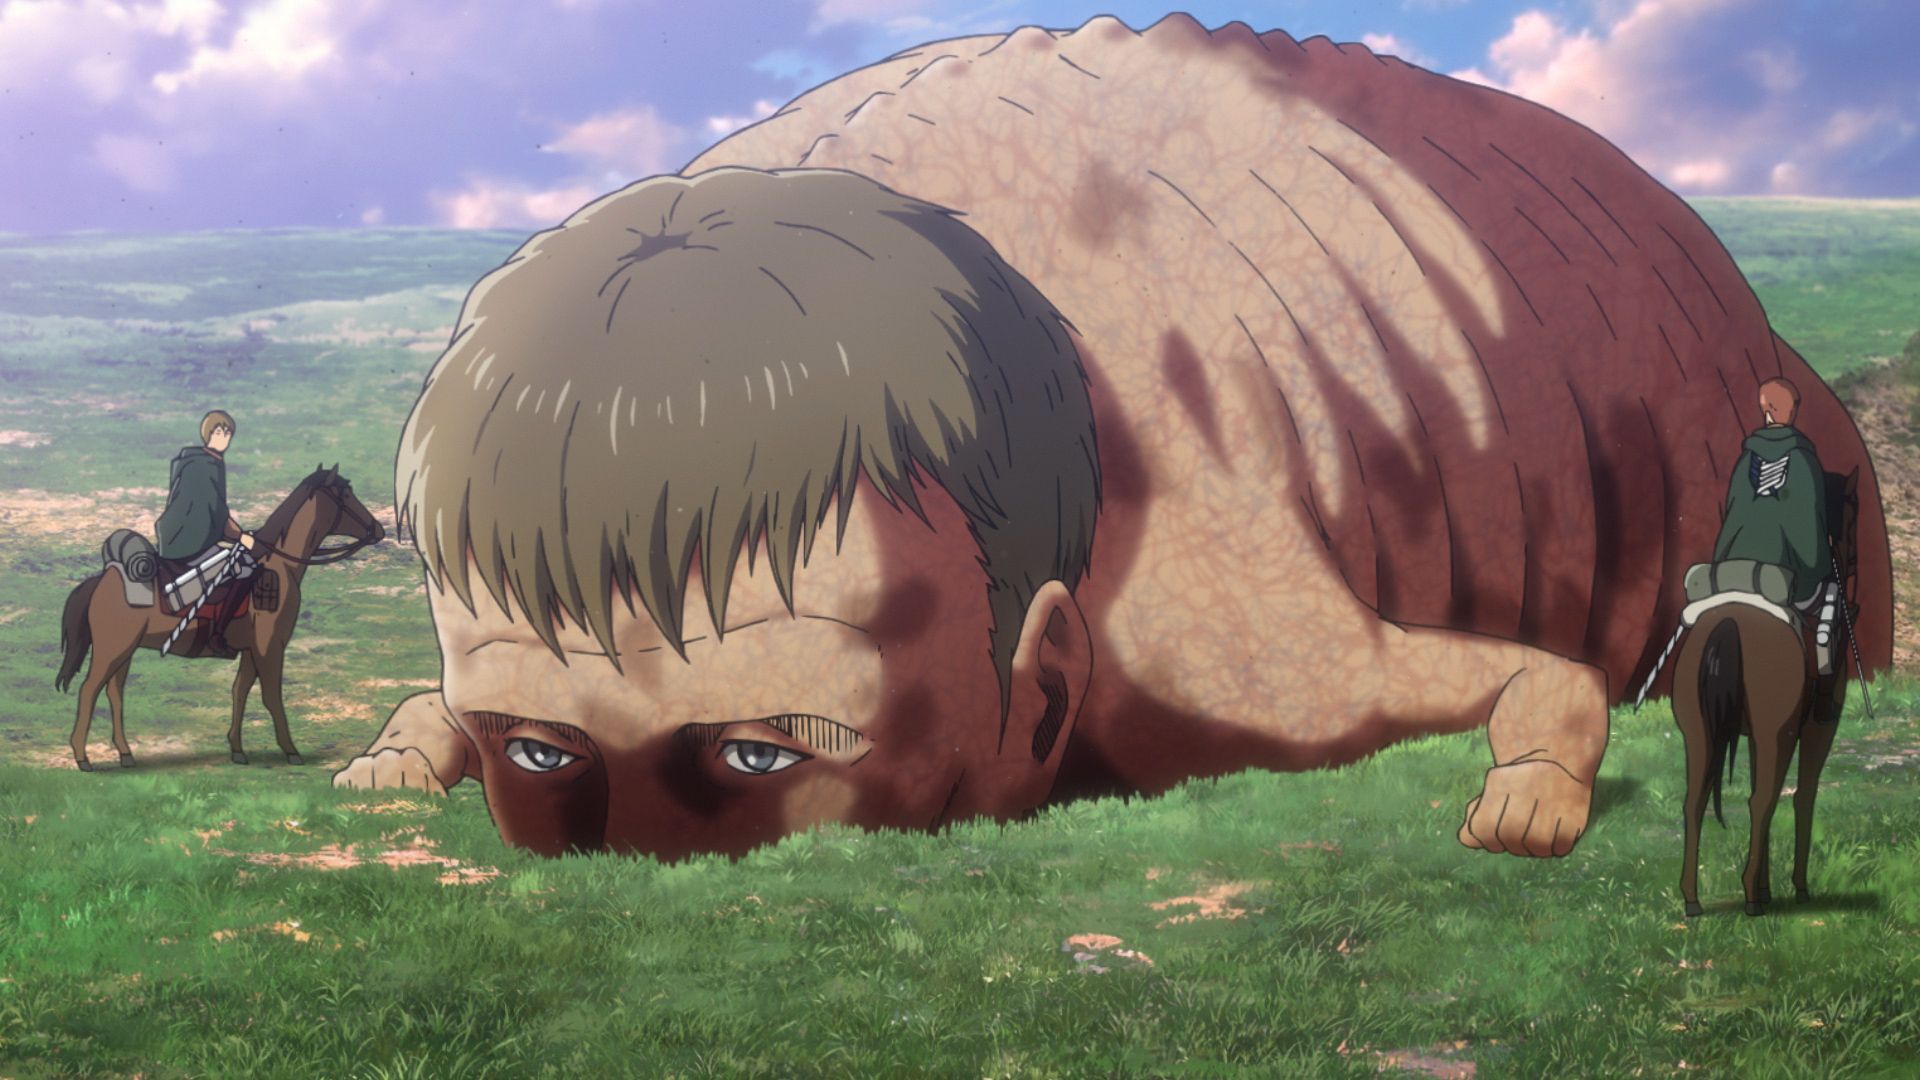 Attack On Titan The Other Side Of The Wall Anime